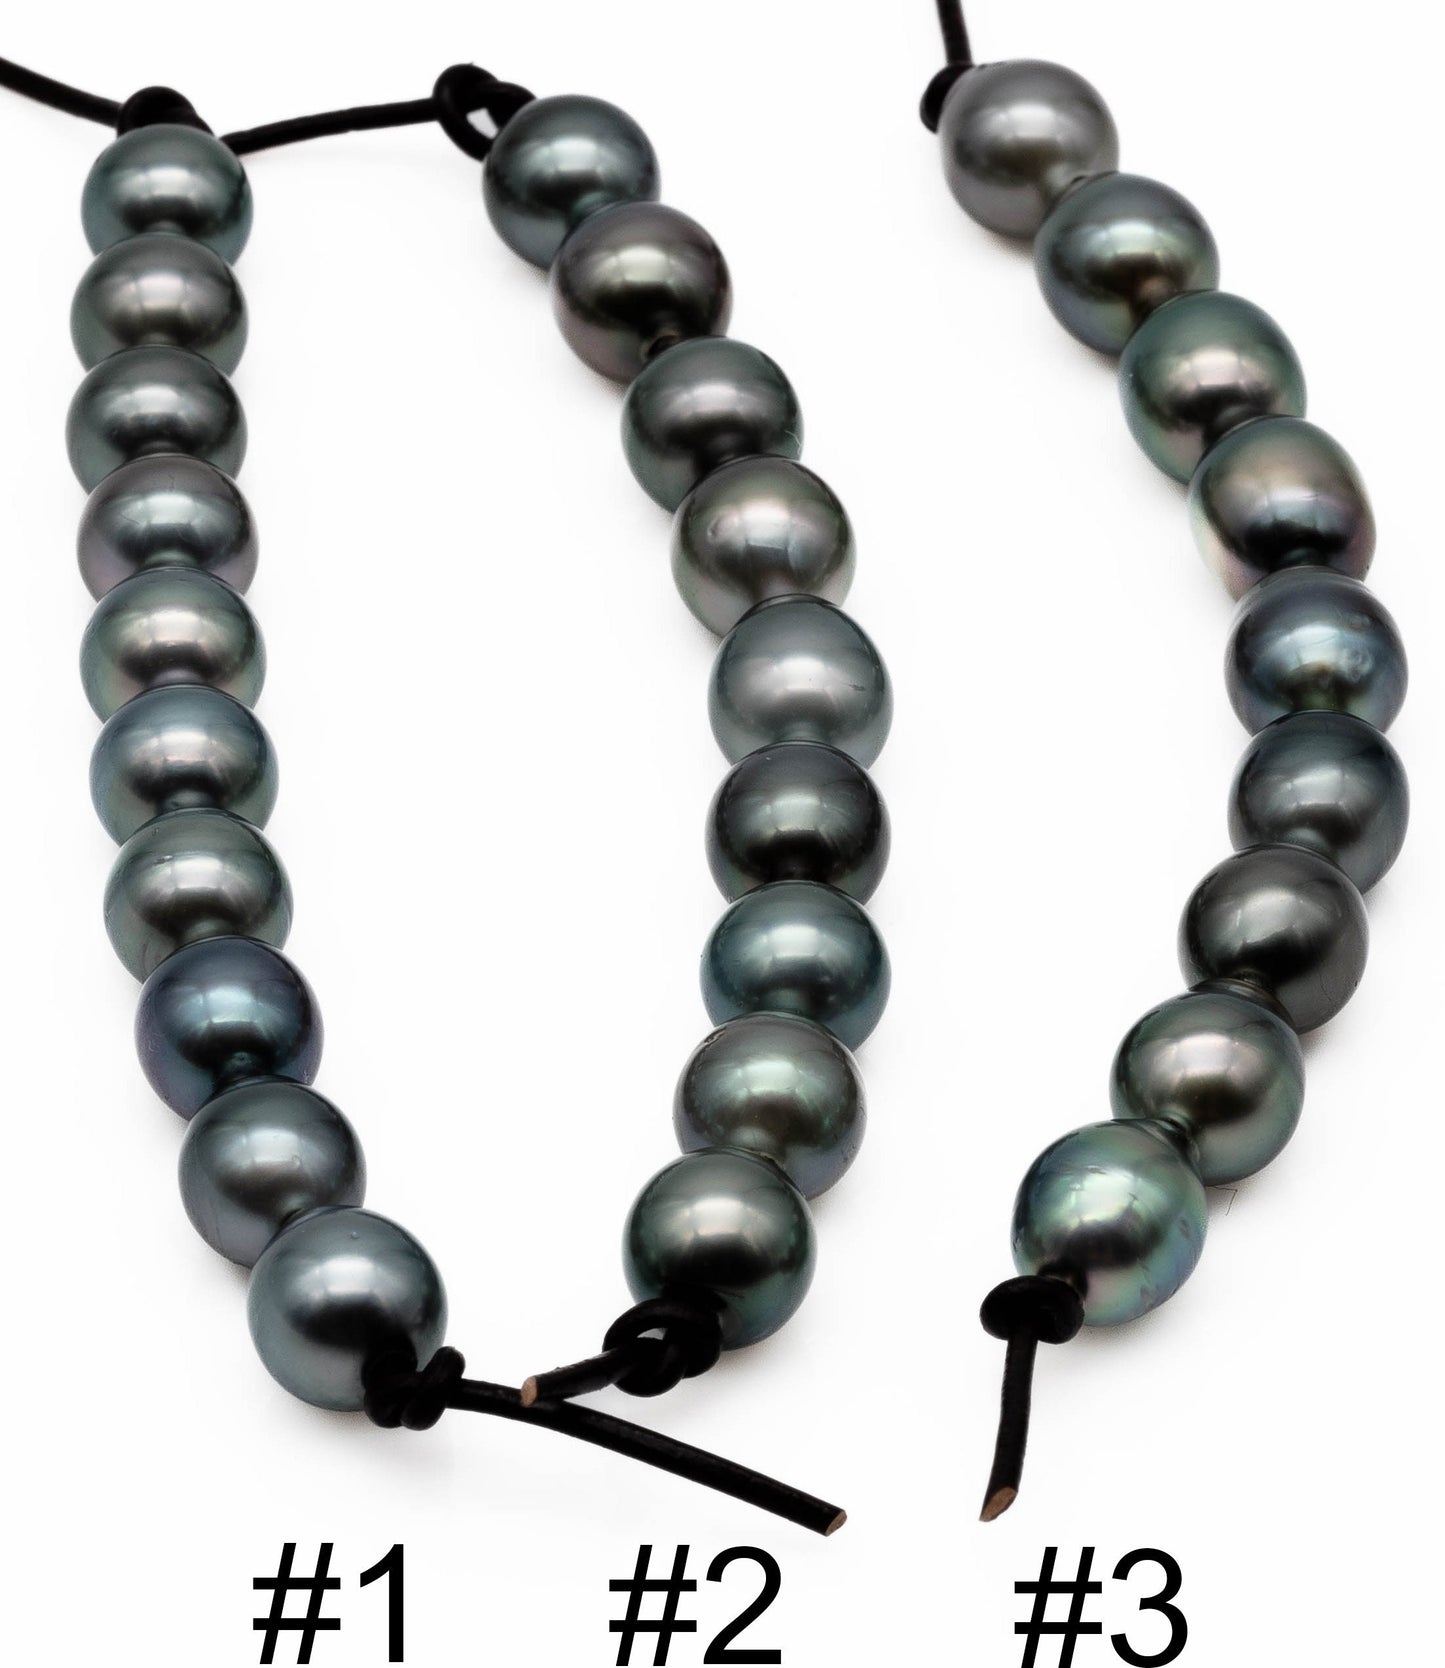 Natural Tahitian Pearls Large Hole, Near Round or Teardrop with 2mm Hole in 9.5-10mm, Limited Blemishes, High Quality Luster, SKU# 1018TH